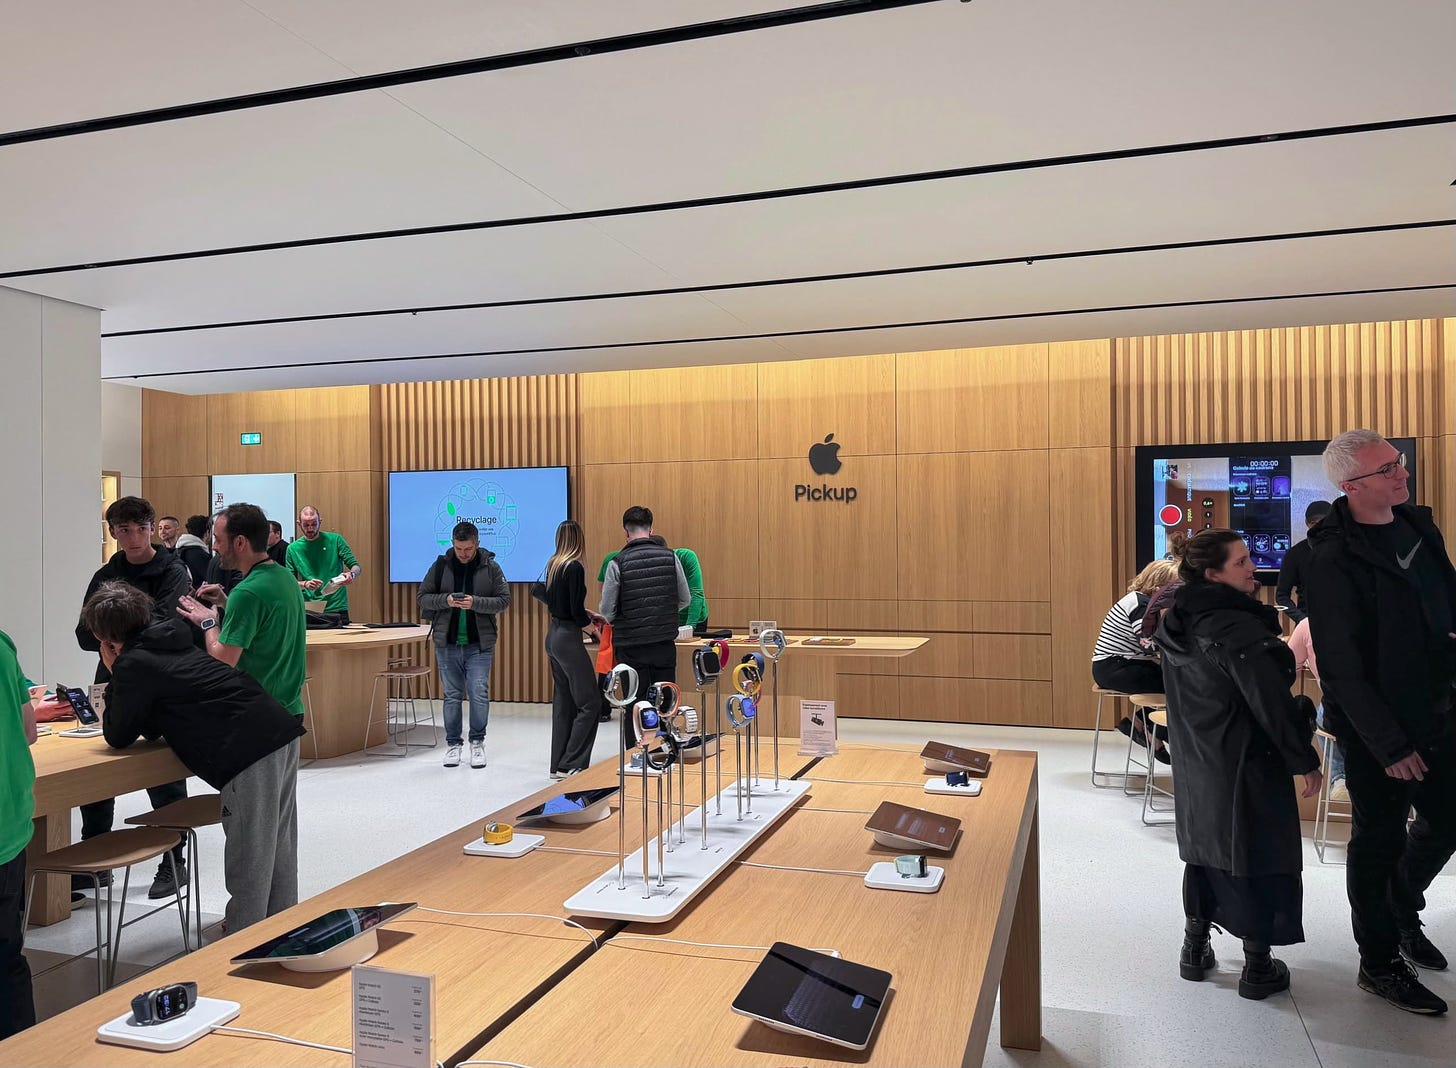 The Apple Pickup counter at Apple Parly 2.